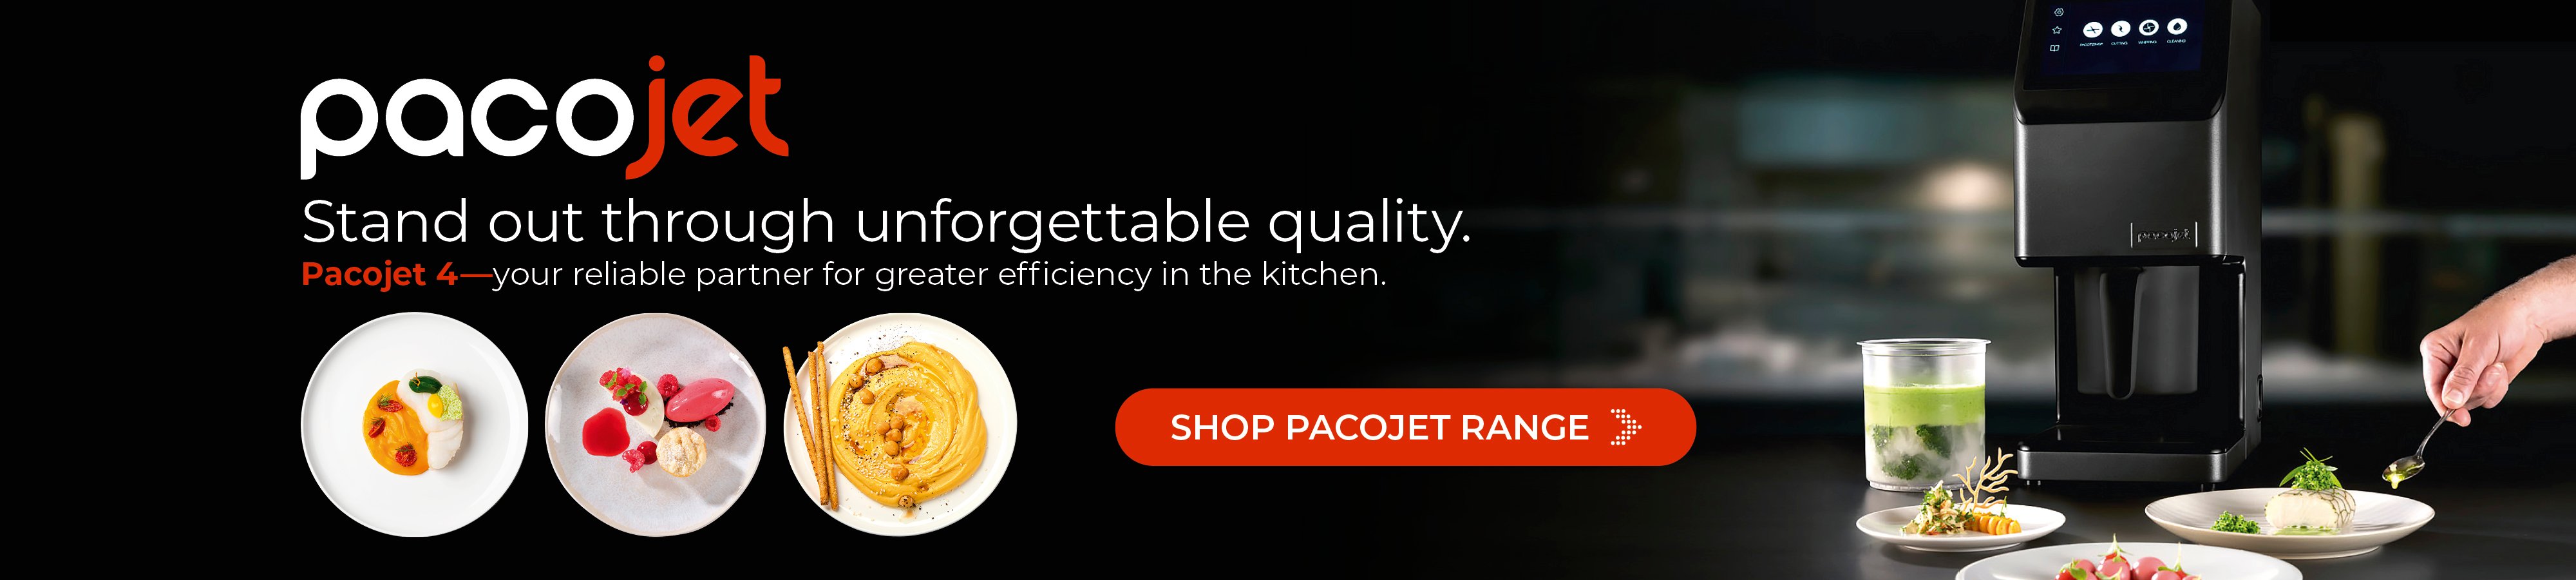 Elevate your kitchen experience with new Pacojet 4